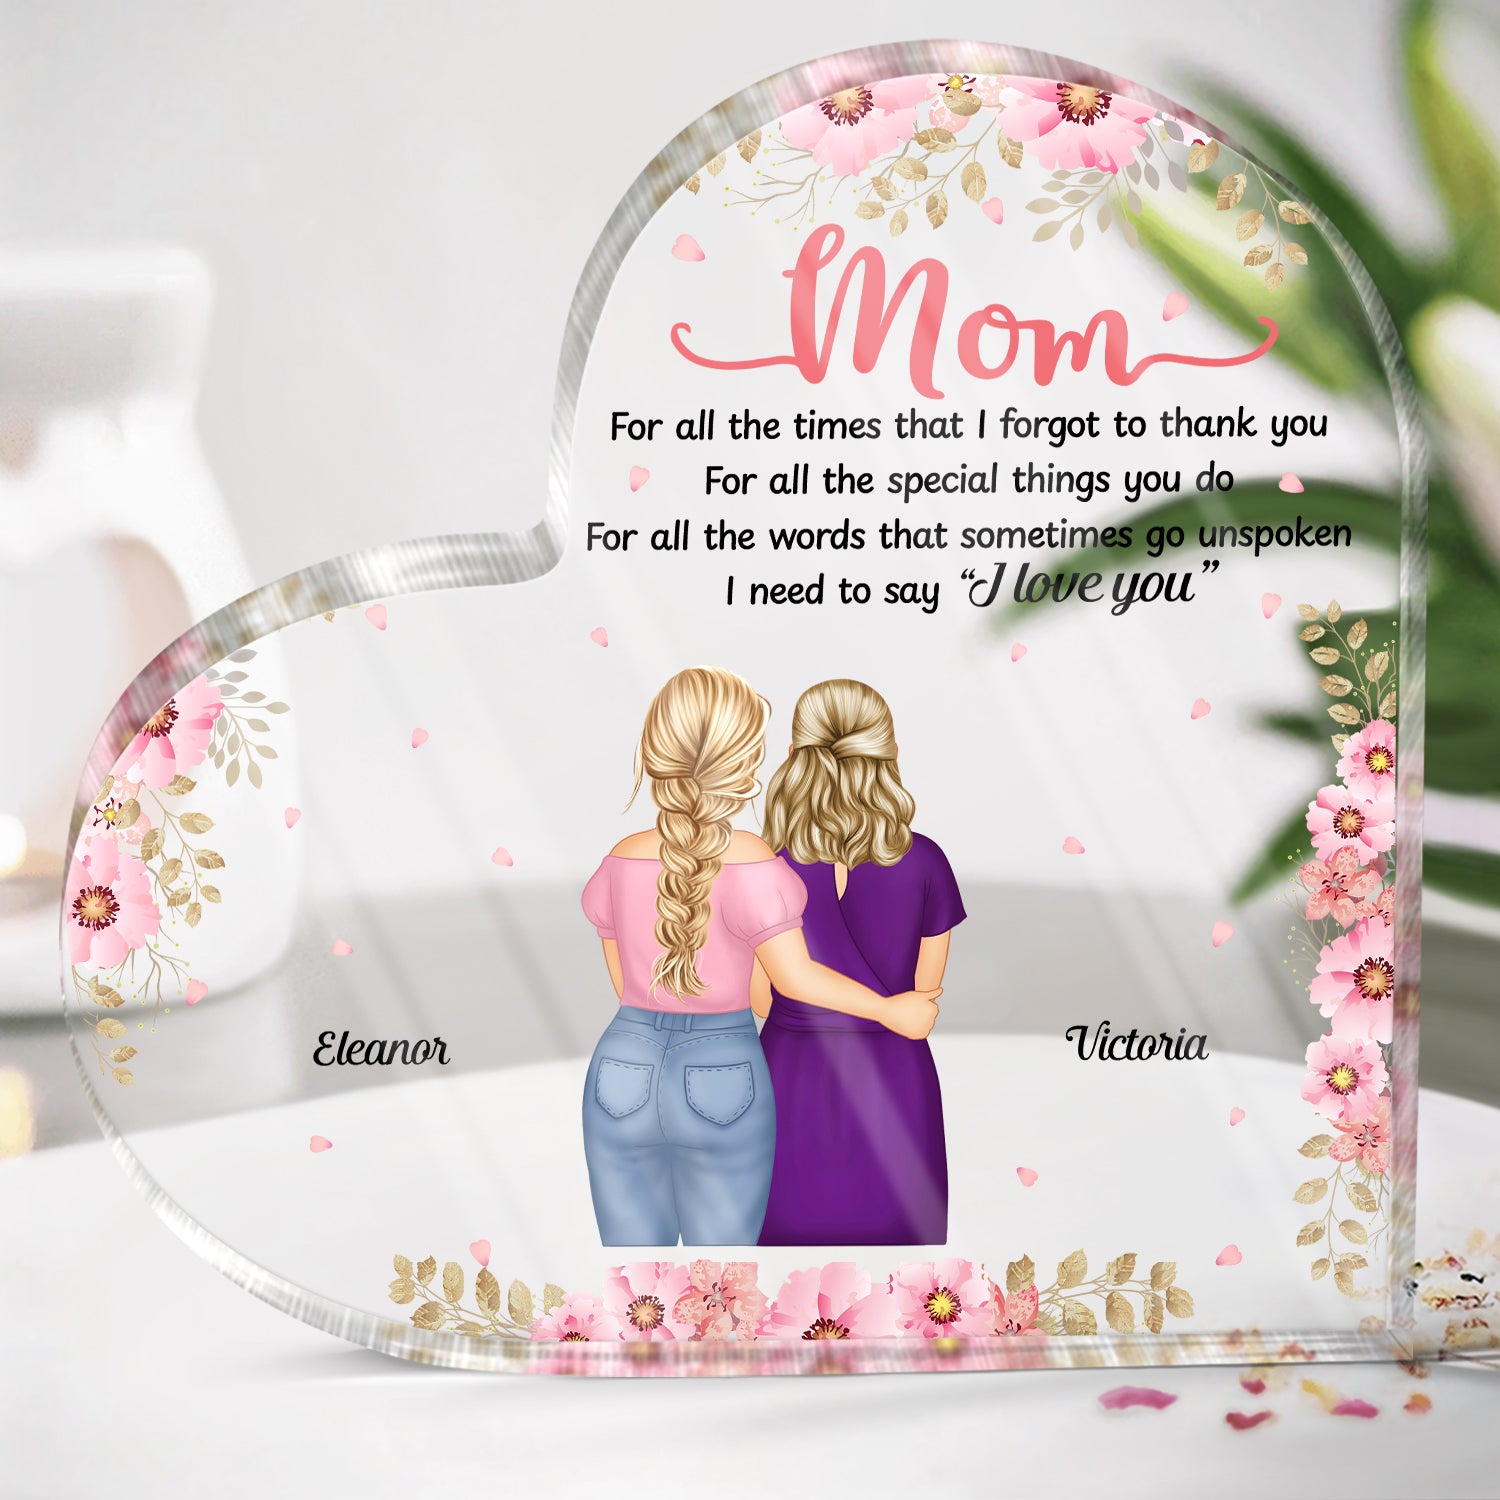 Mom For All The Times I Forgot To Thank You - Gift For Mother - Personalized Heart Shaped Acrylic Plaque